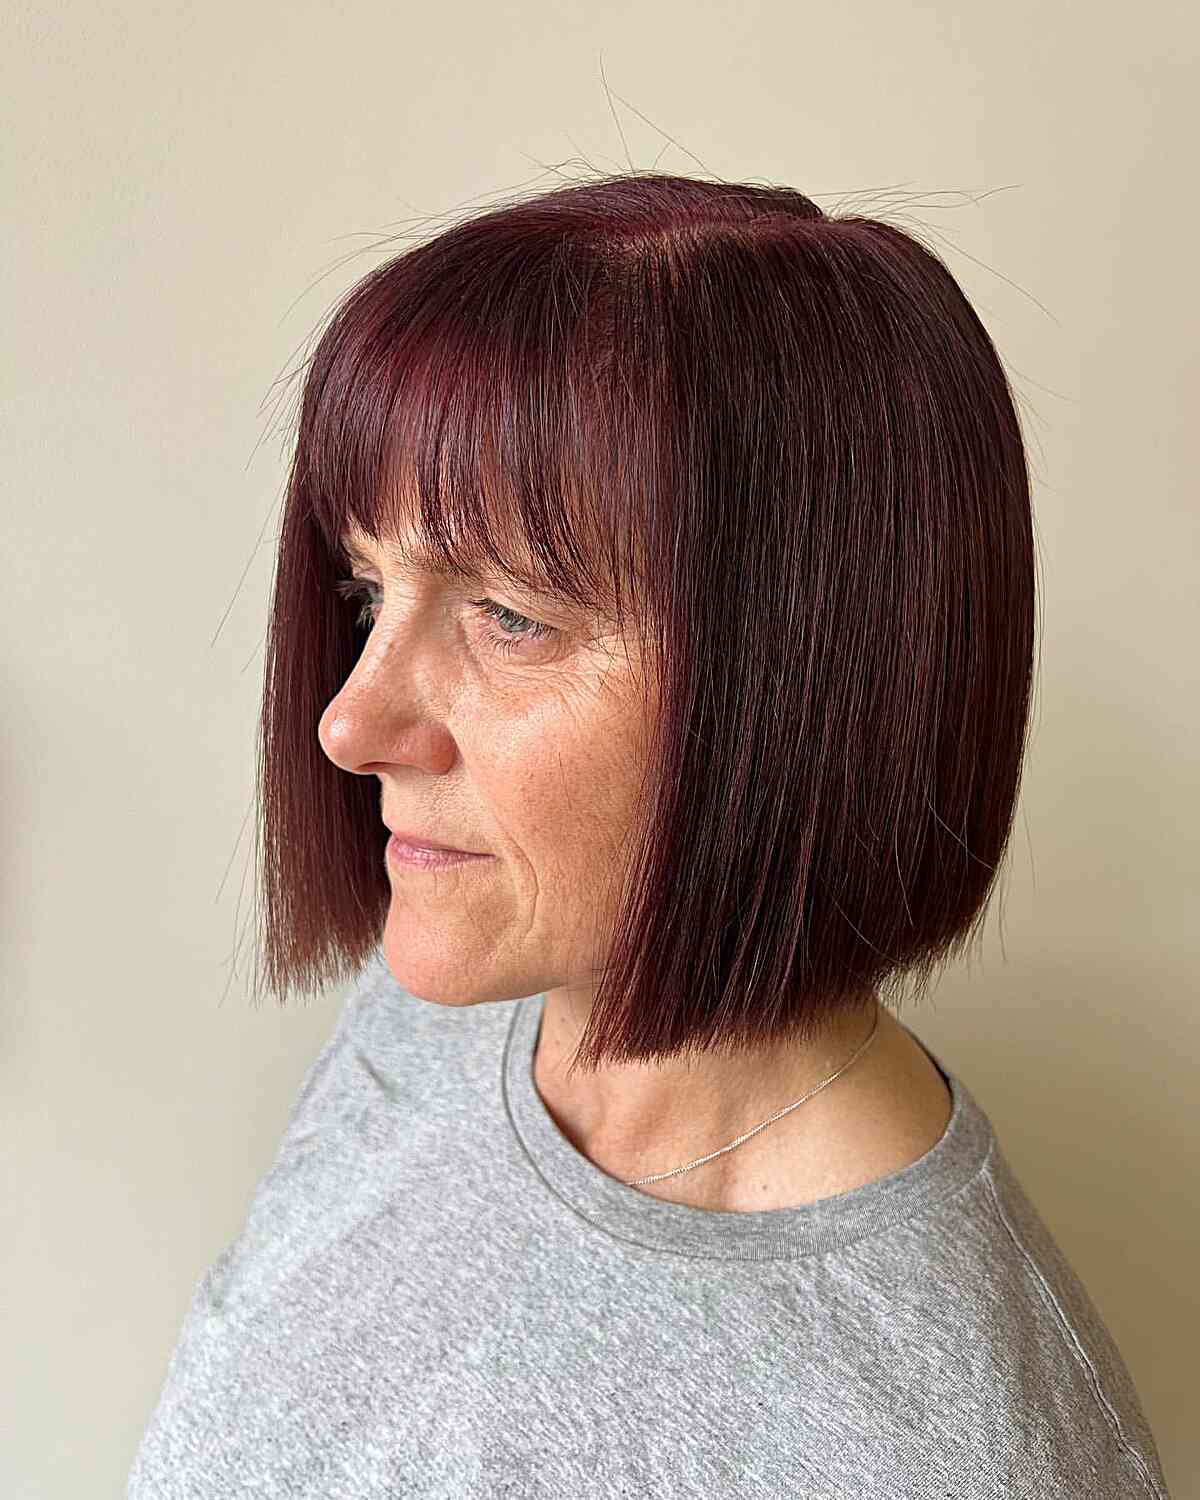 Chin-Length Sleek Bob Cut and Bangs with Maroon Red Color for Older Ladies Passed 60